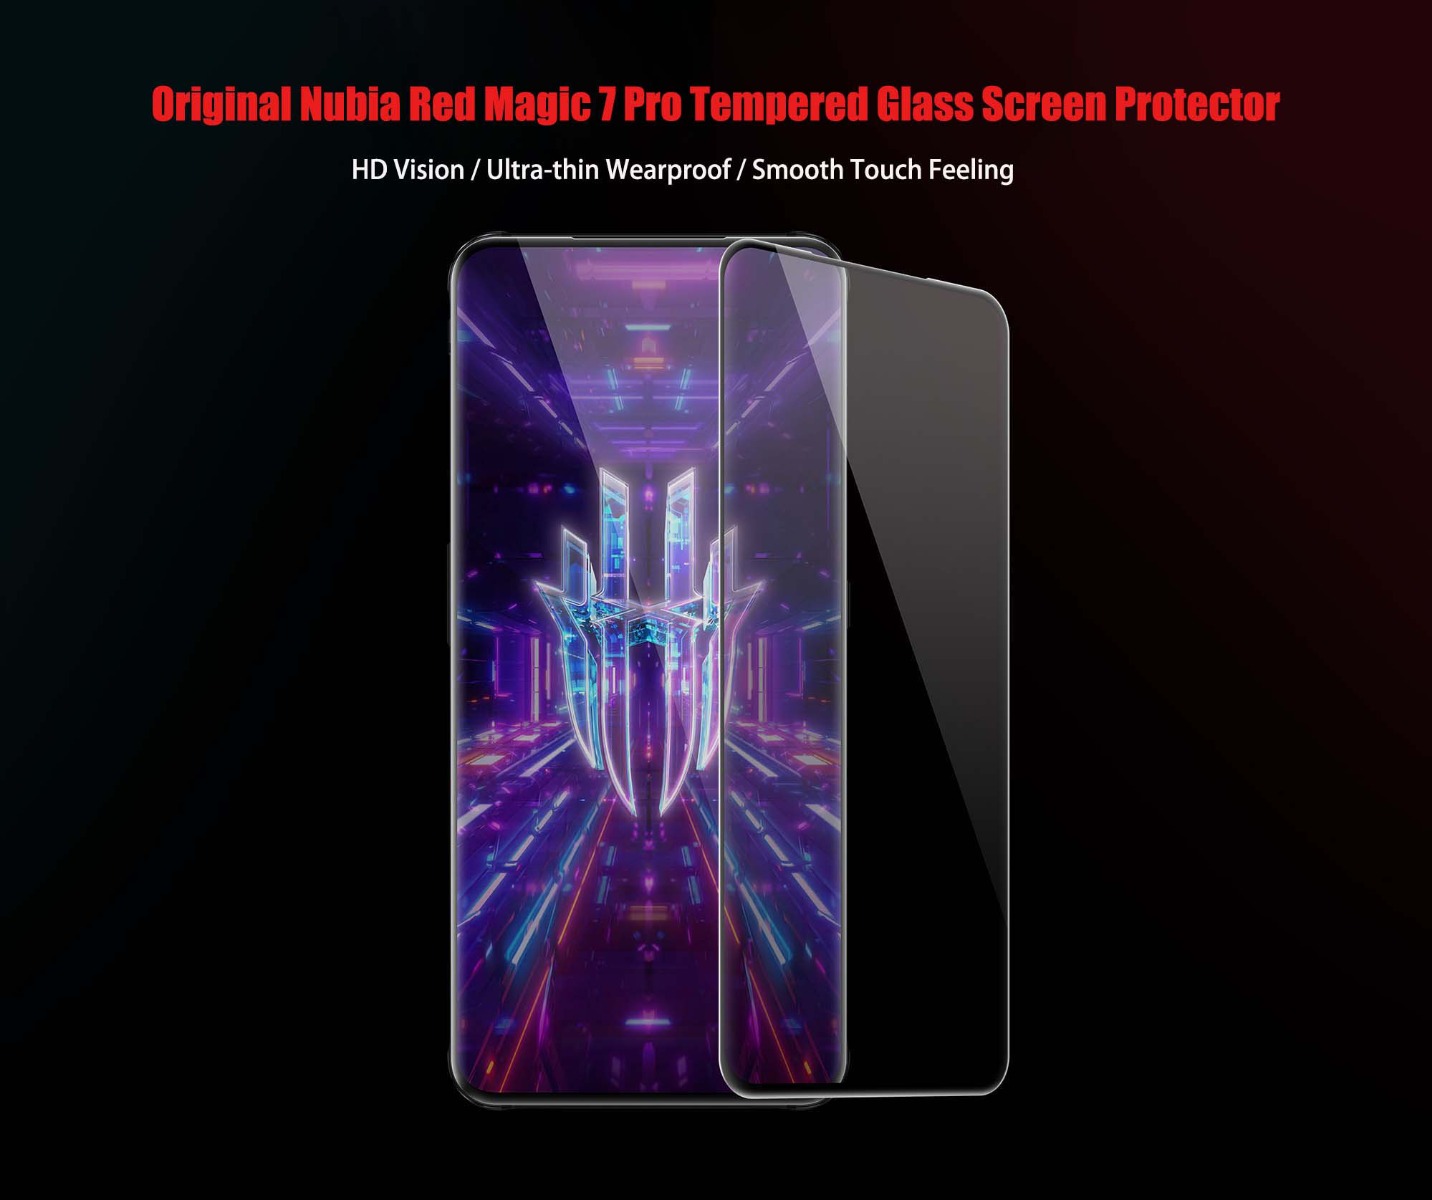 Nubia Red Magic 7 Pro Tempered Glass Screen Protector